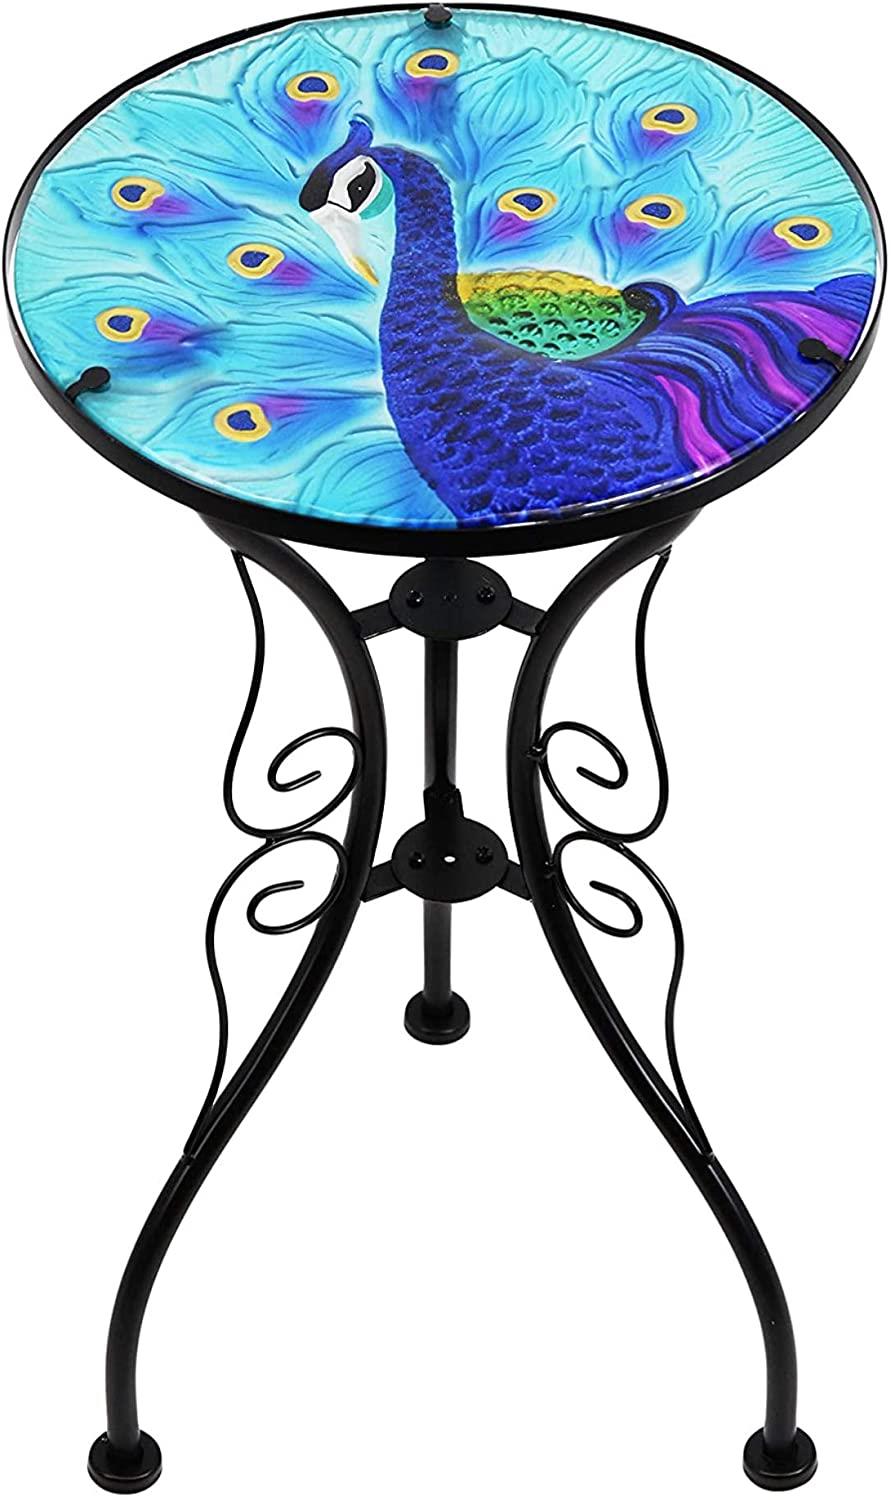 Geezy table Round Side Mosaic Garden Table With Blue Peacock Design